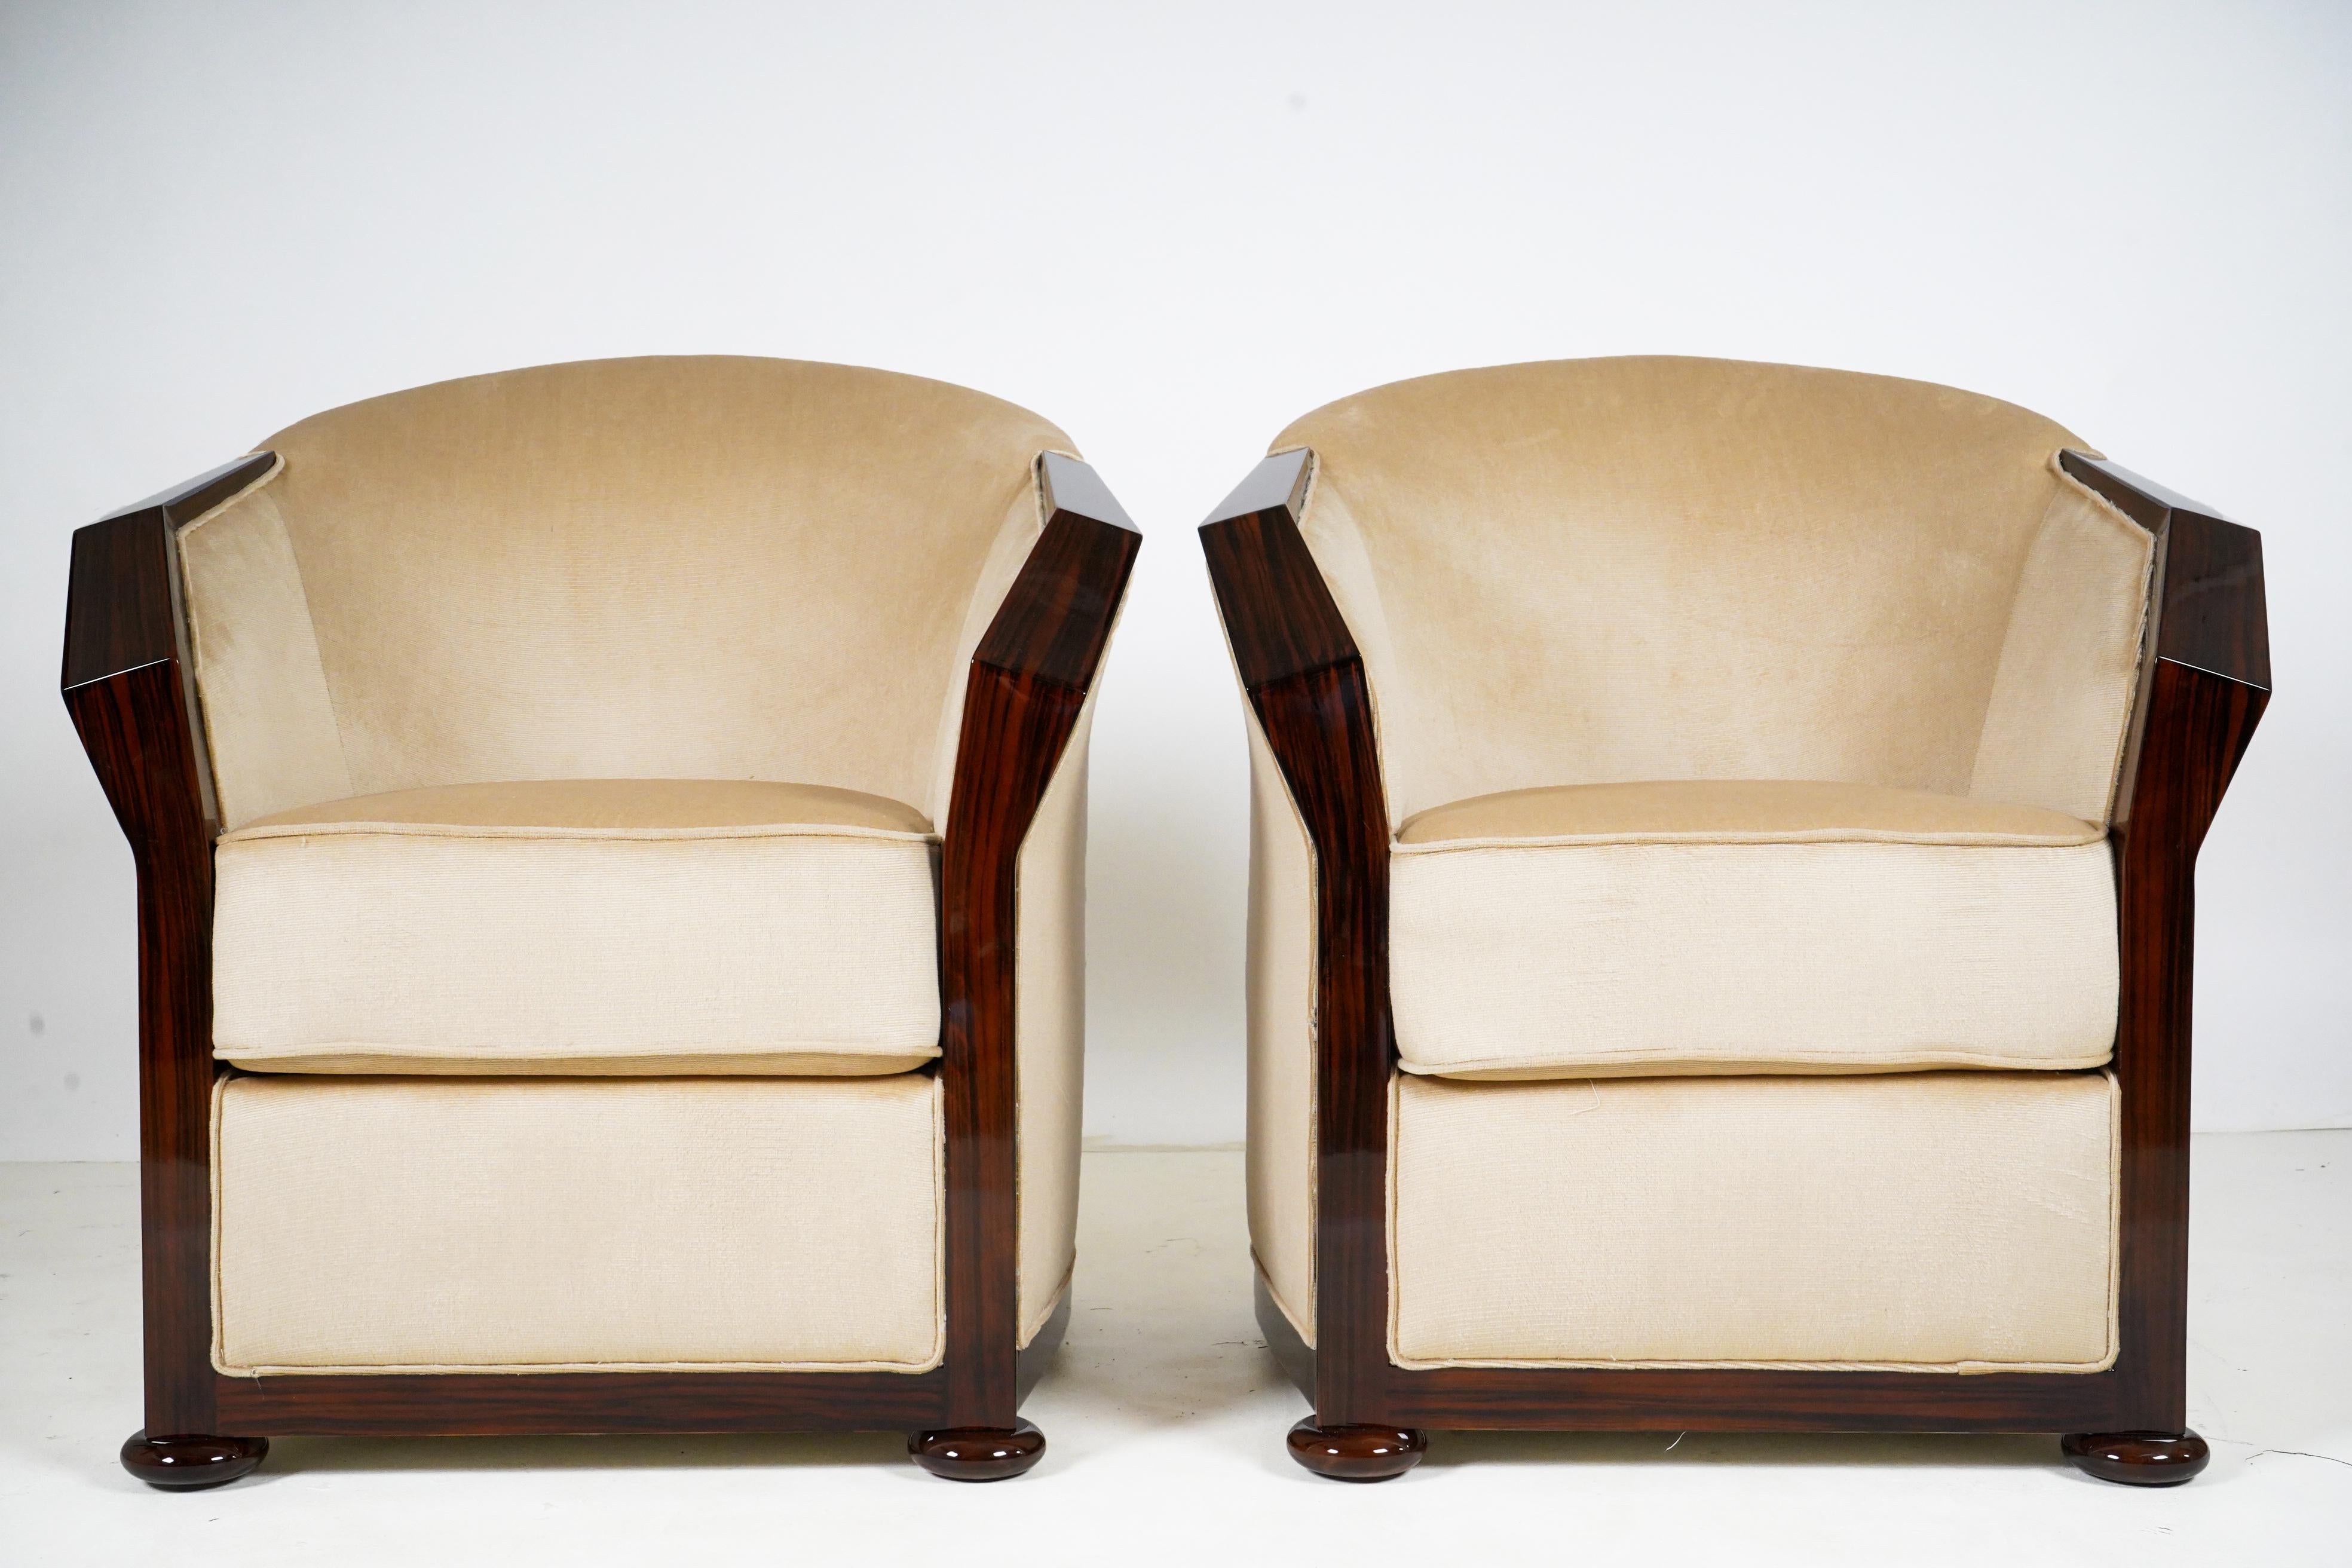 These contemporary Hungarian armchairs are inspired by the designs of Pierre Chareau in the 1920s and 30s. Pierre Chareau is often cited as one of France’s first truly modern architects. Chareau was interested in Cubism and boldly experimented with